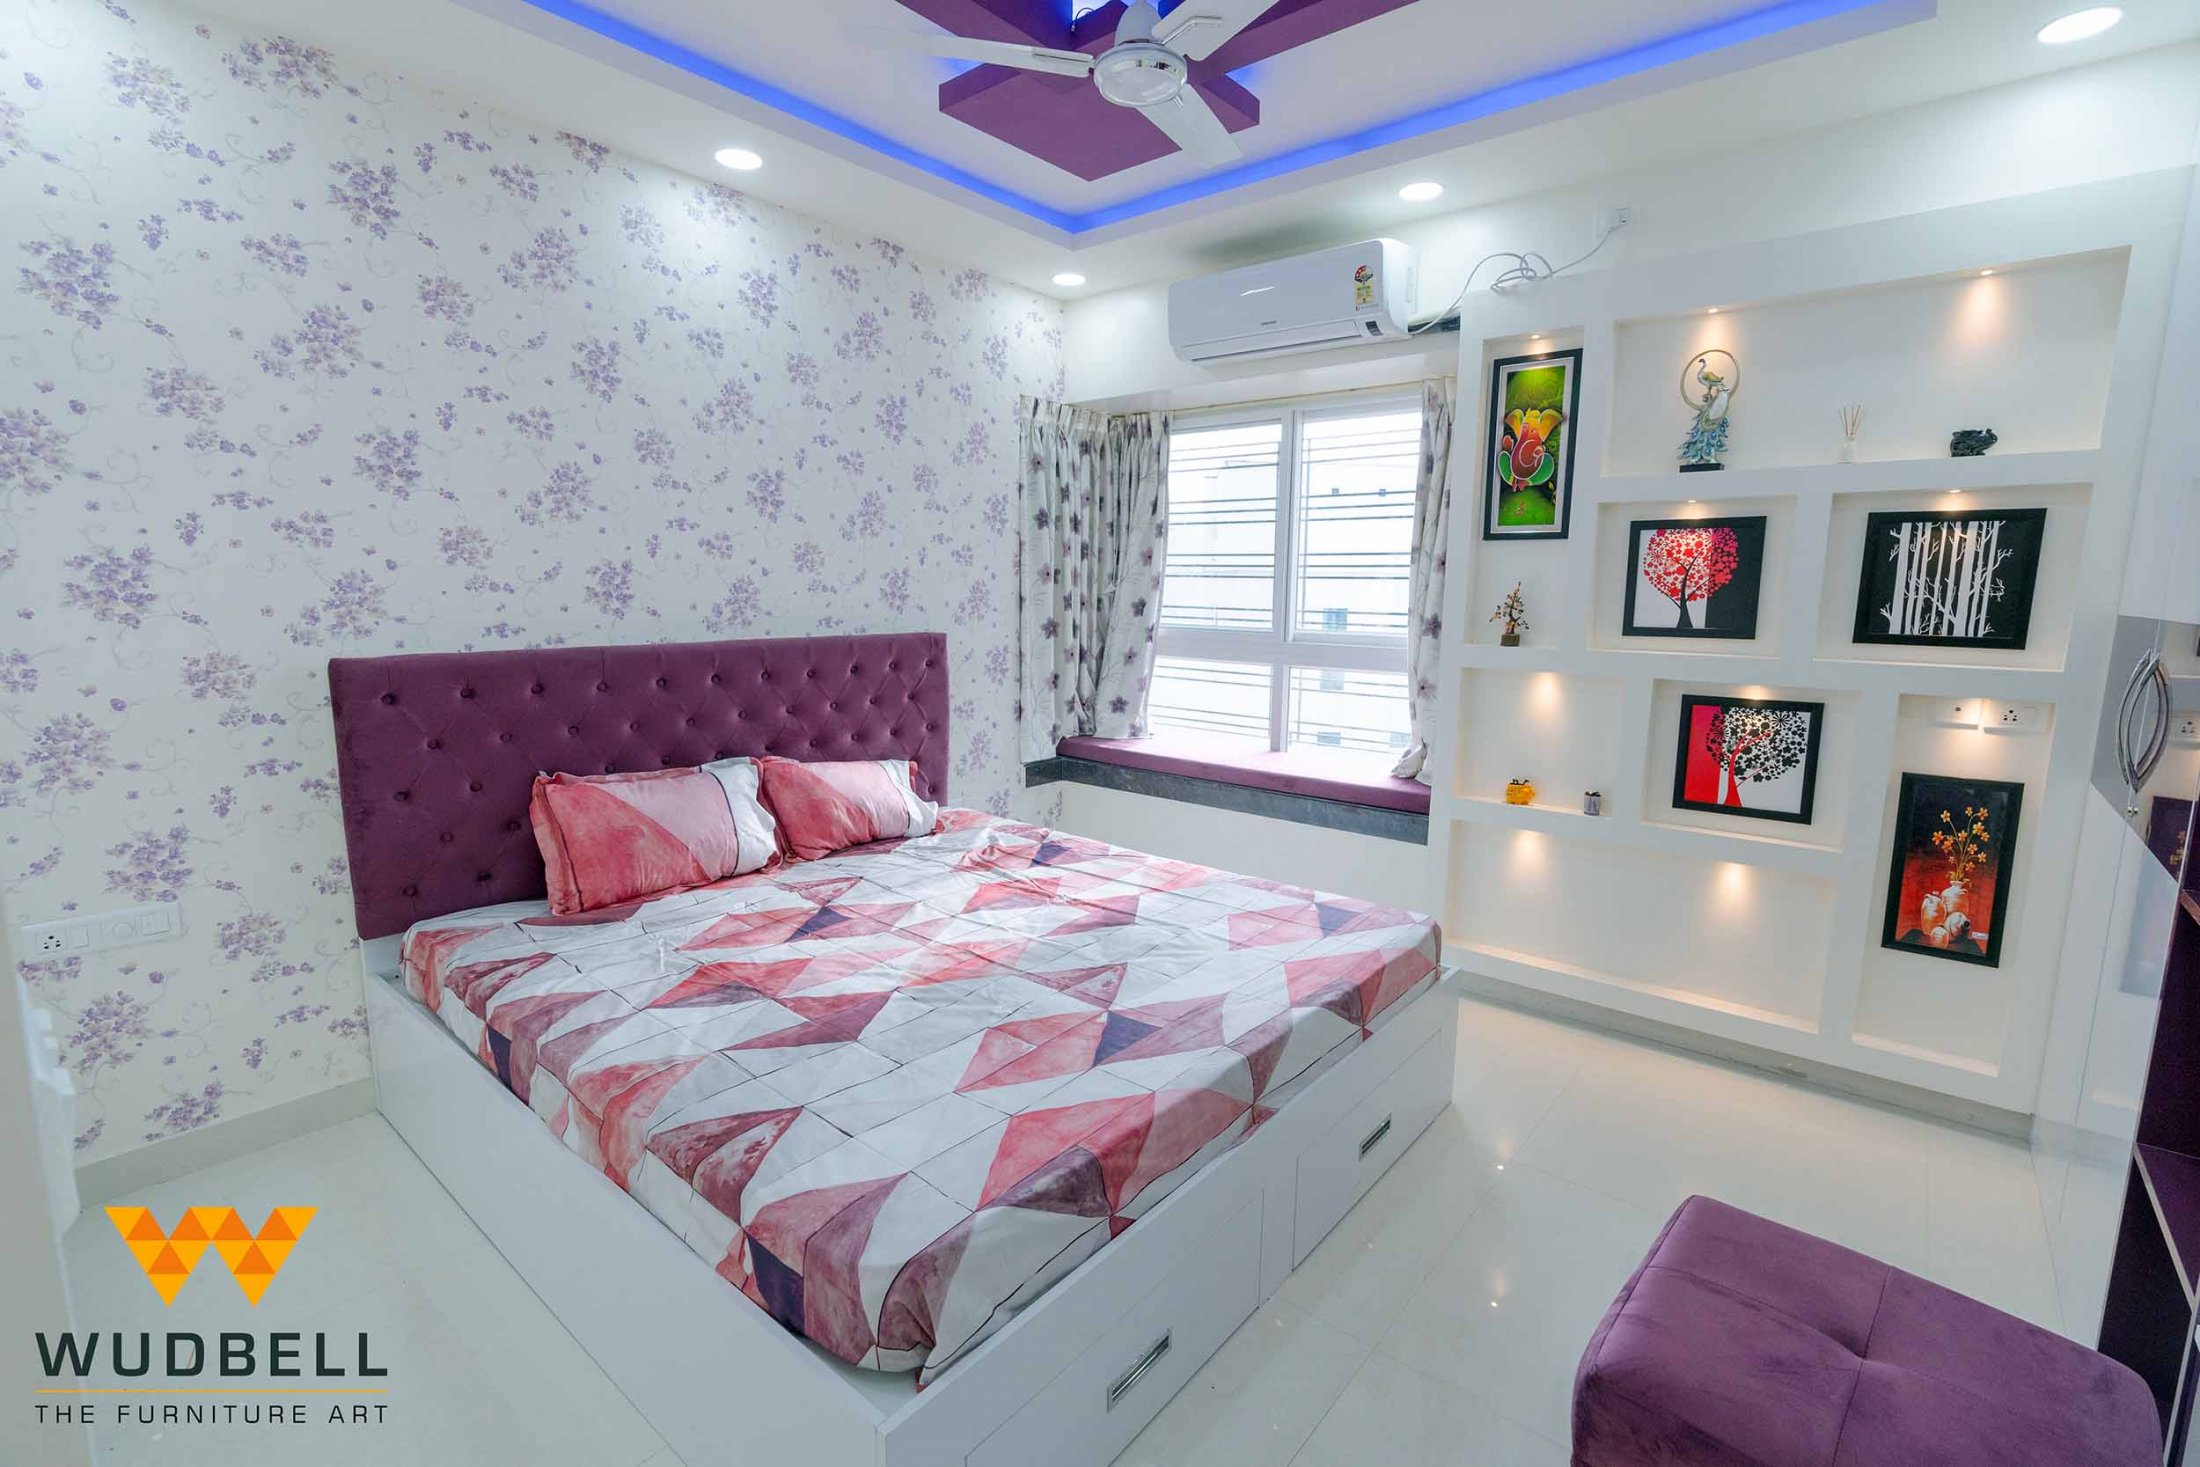 This scintillating bedroom is the perfect vibe for kids